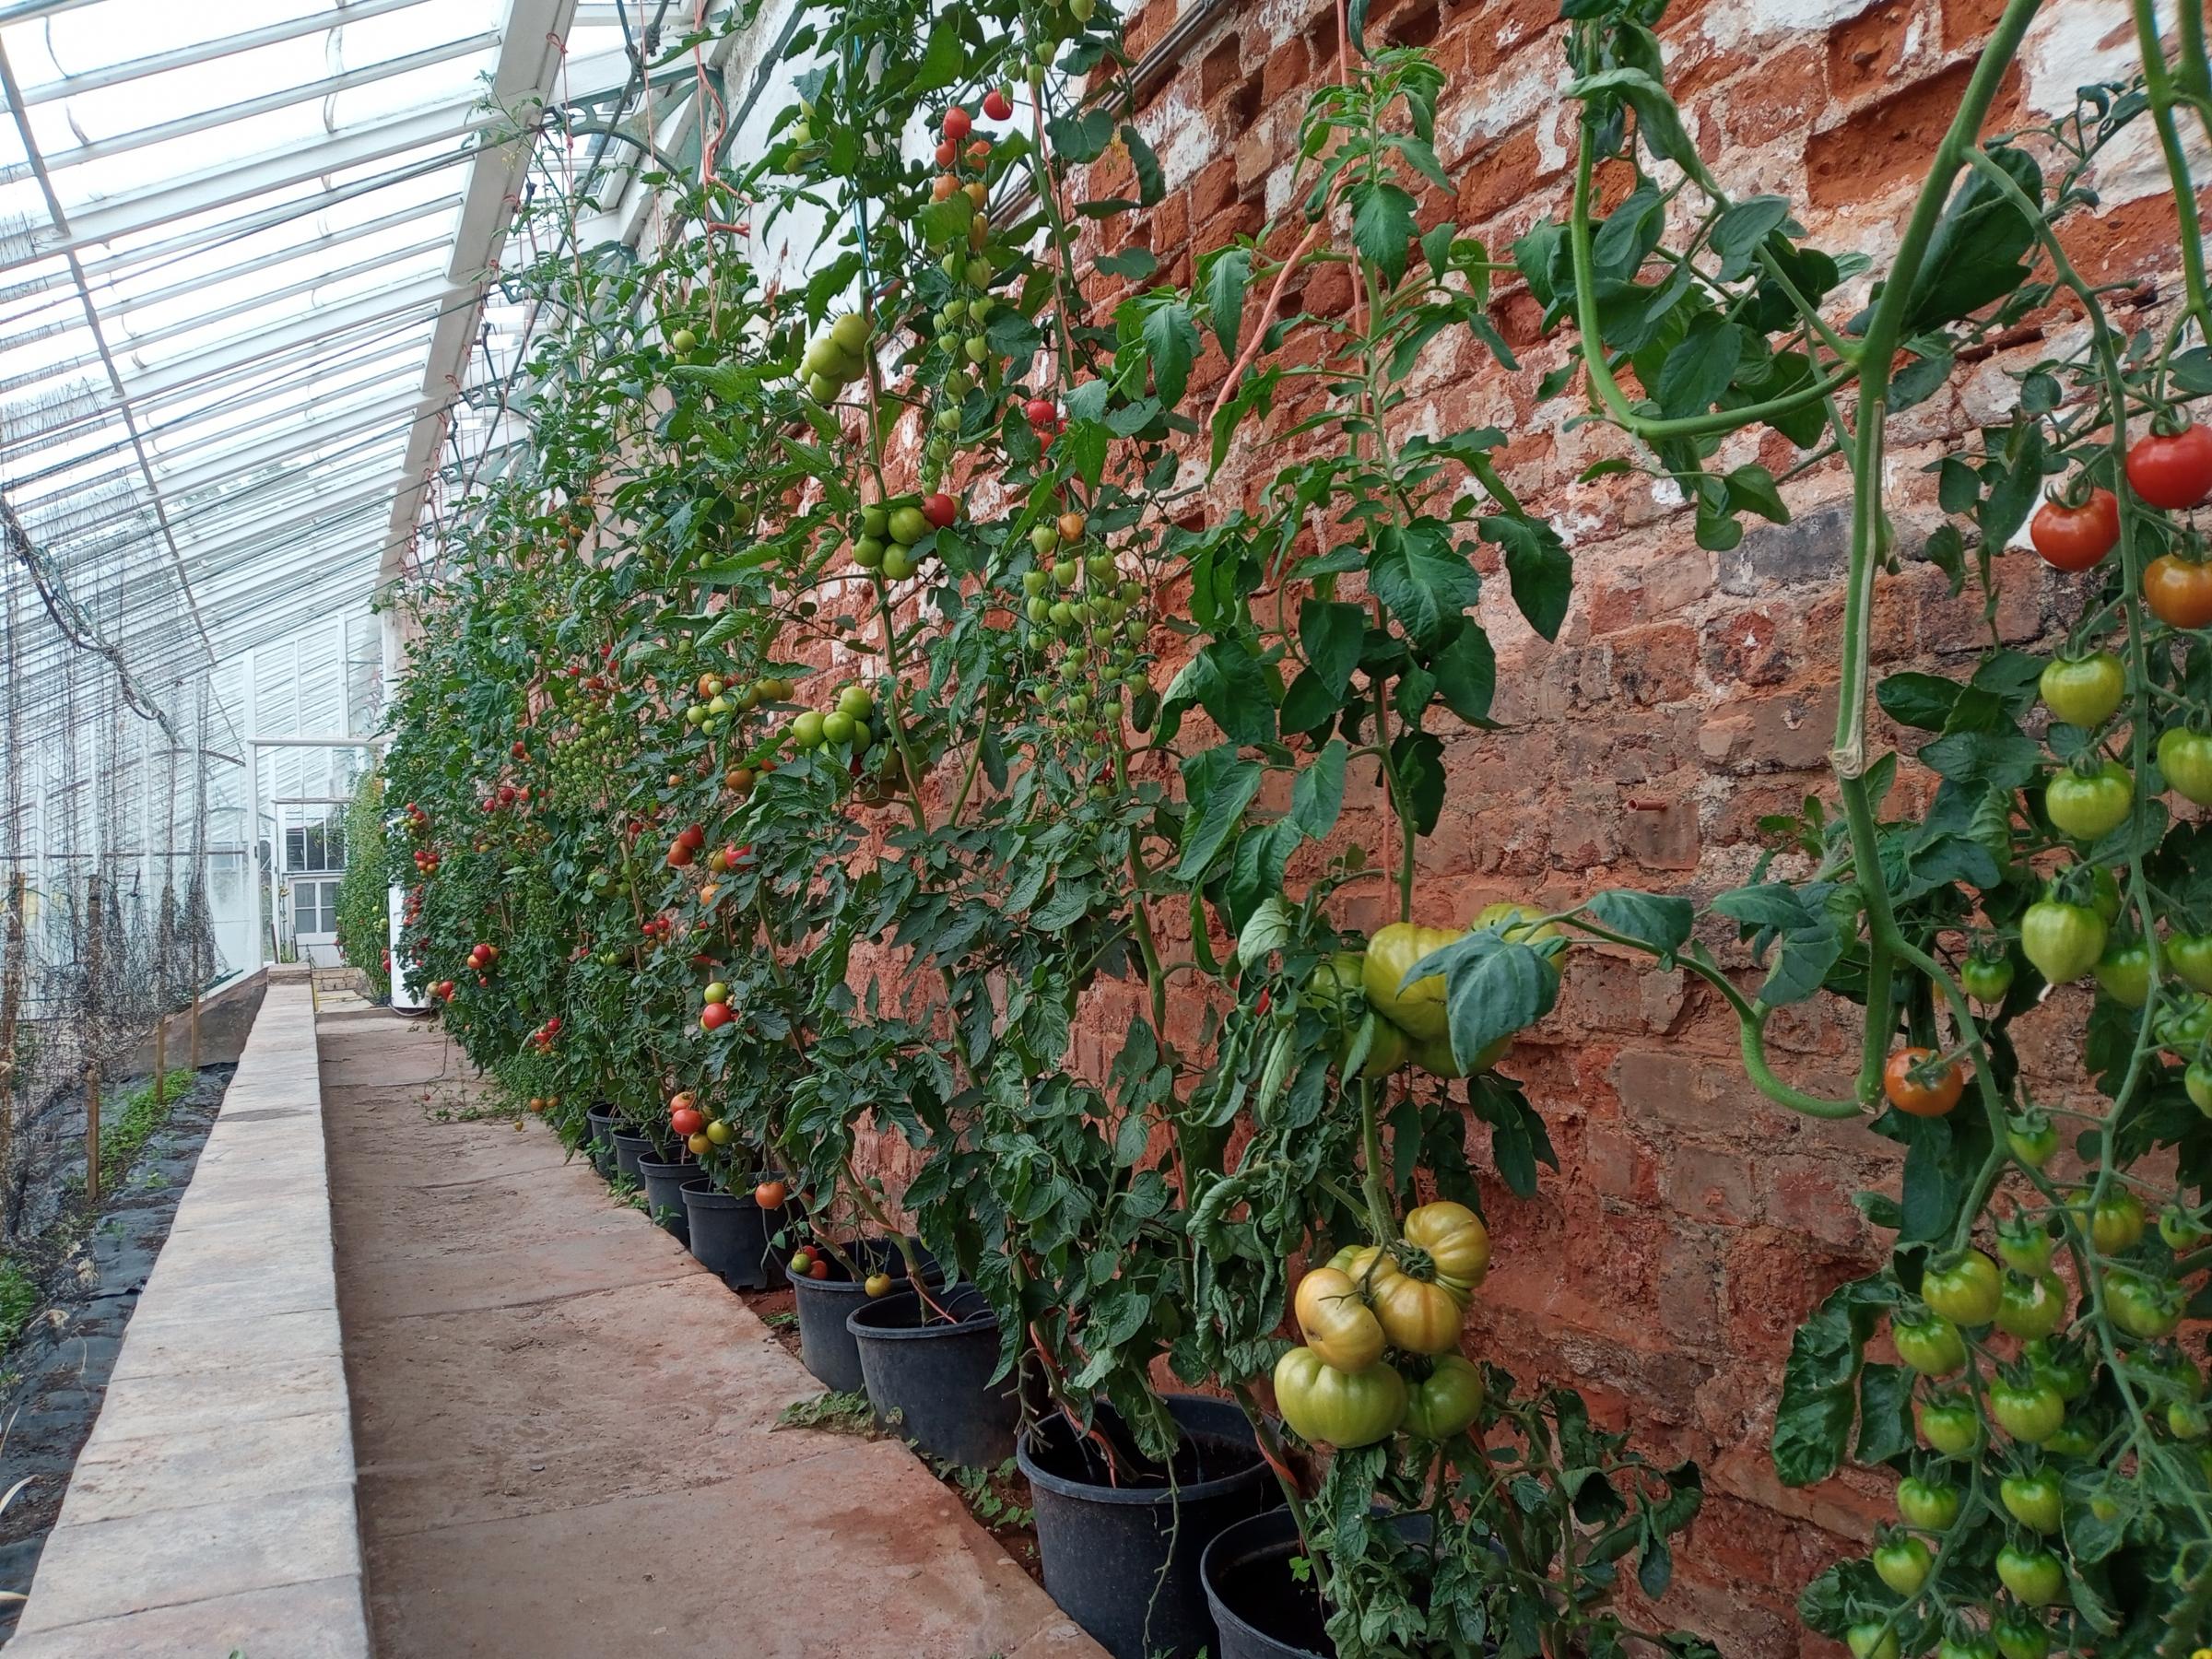 Tomatoes growing inside the Victorian greenhouses.